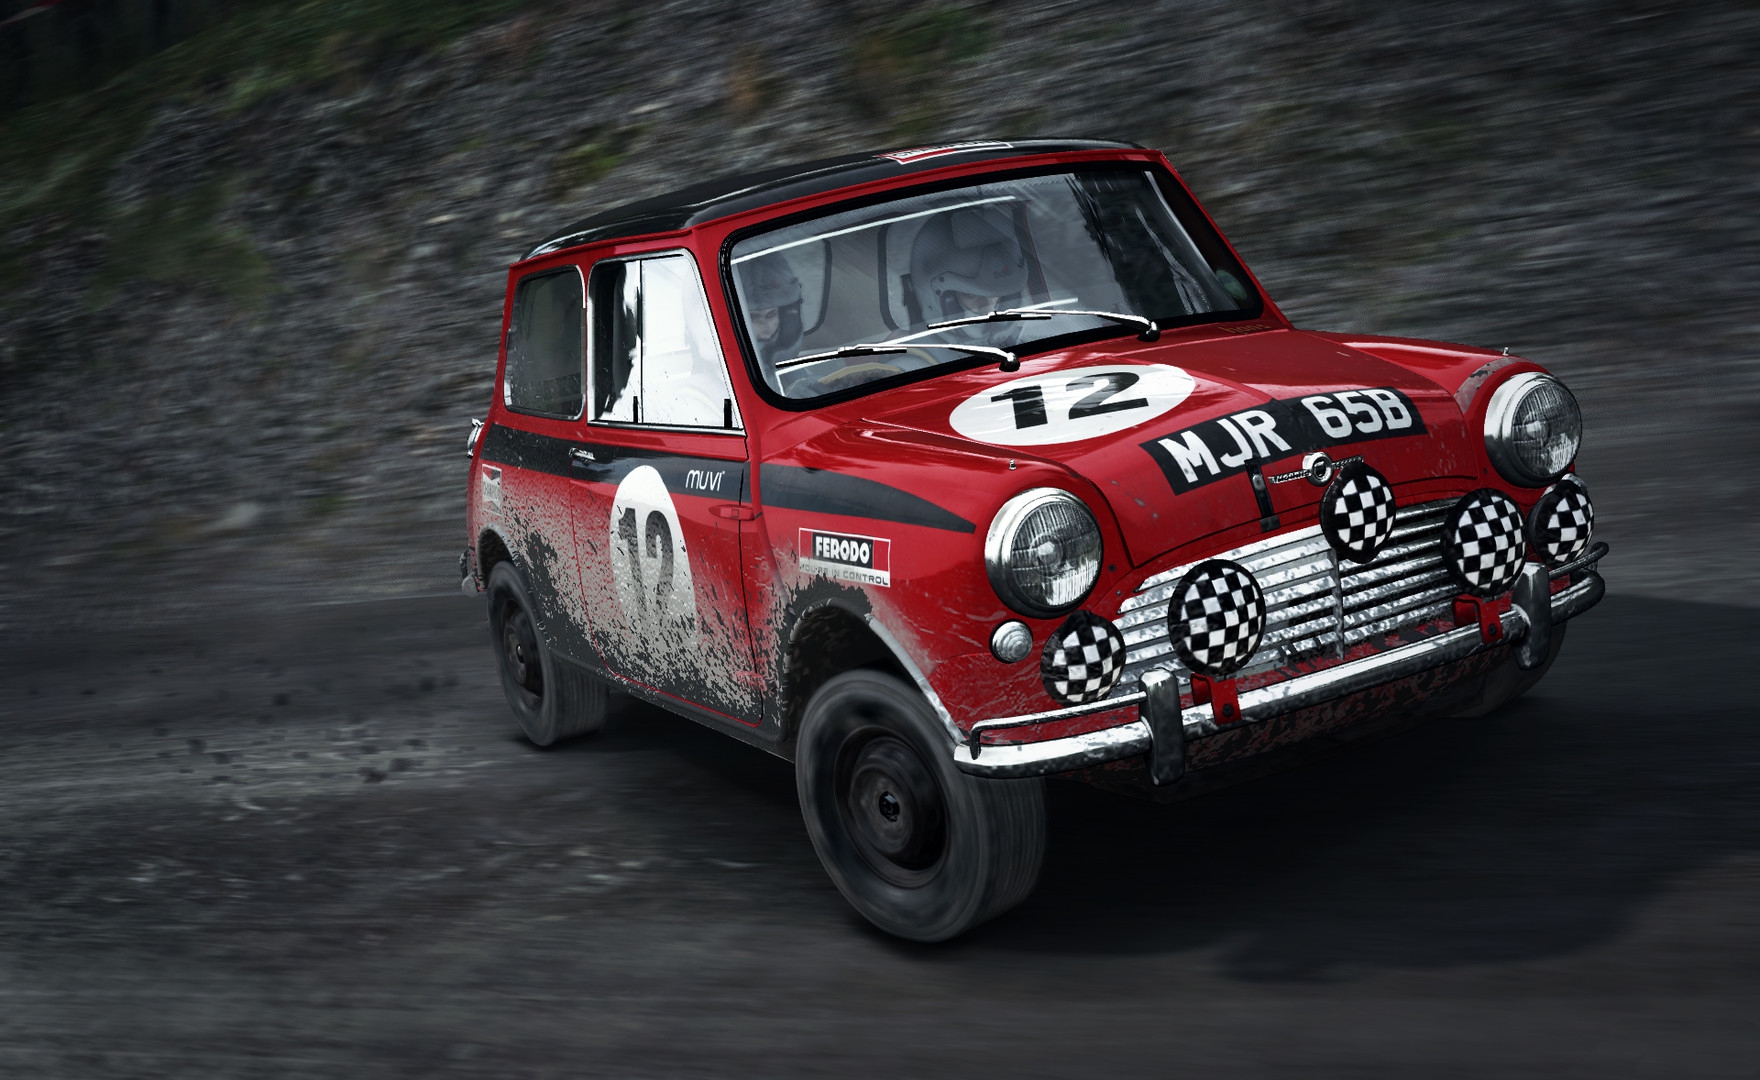 1080p dirt rally images